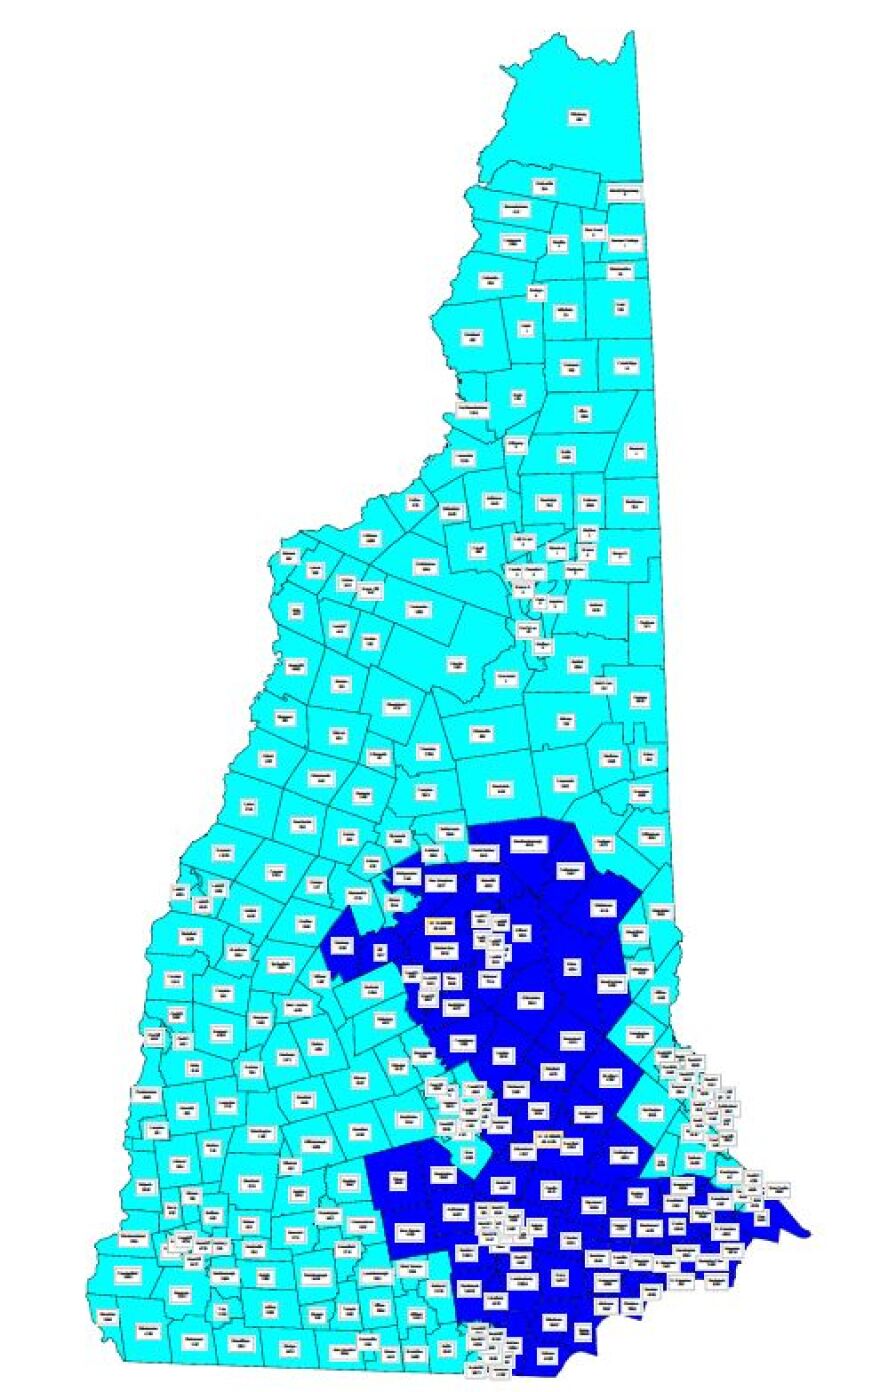 [NH Redistricted]